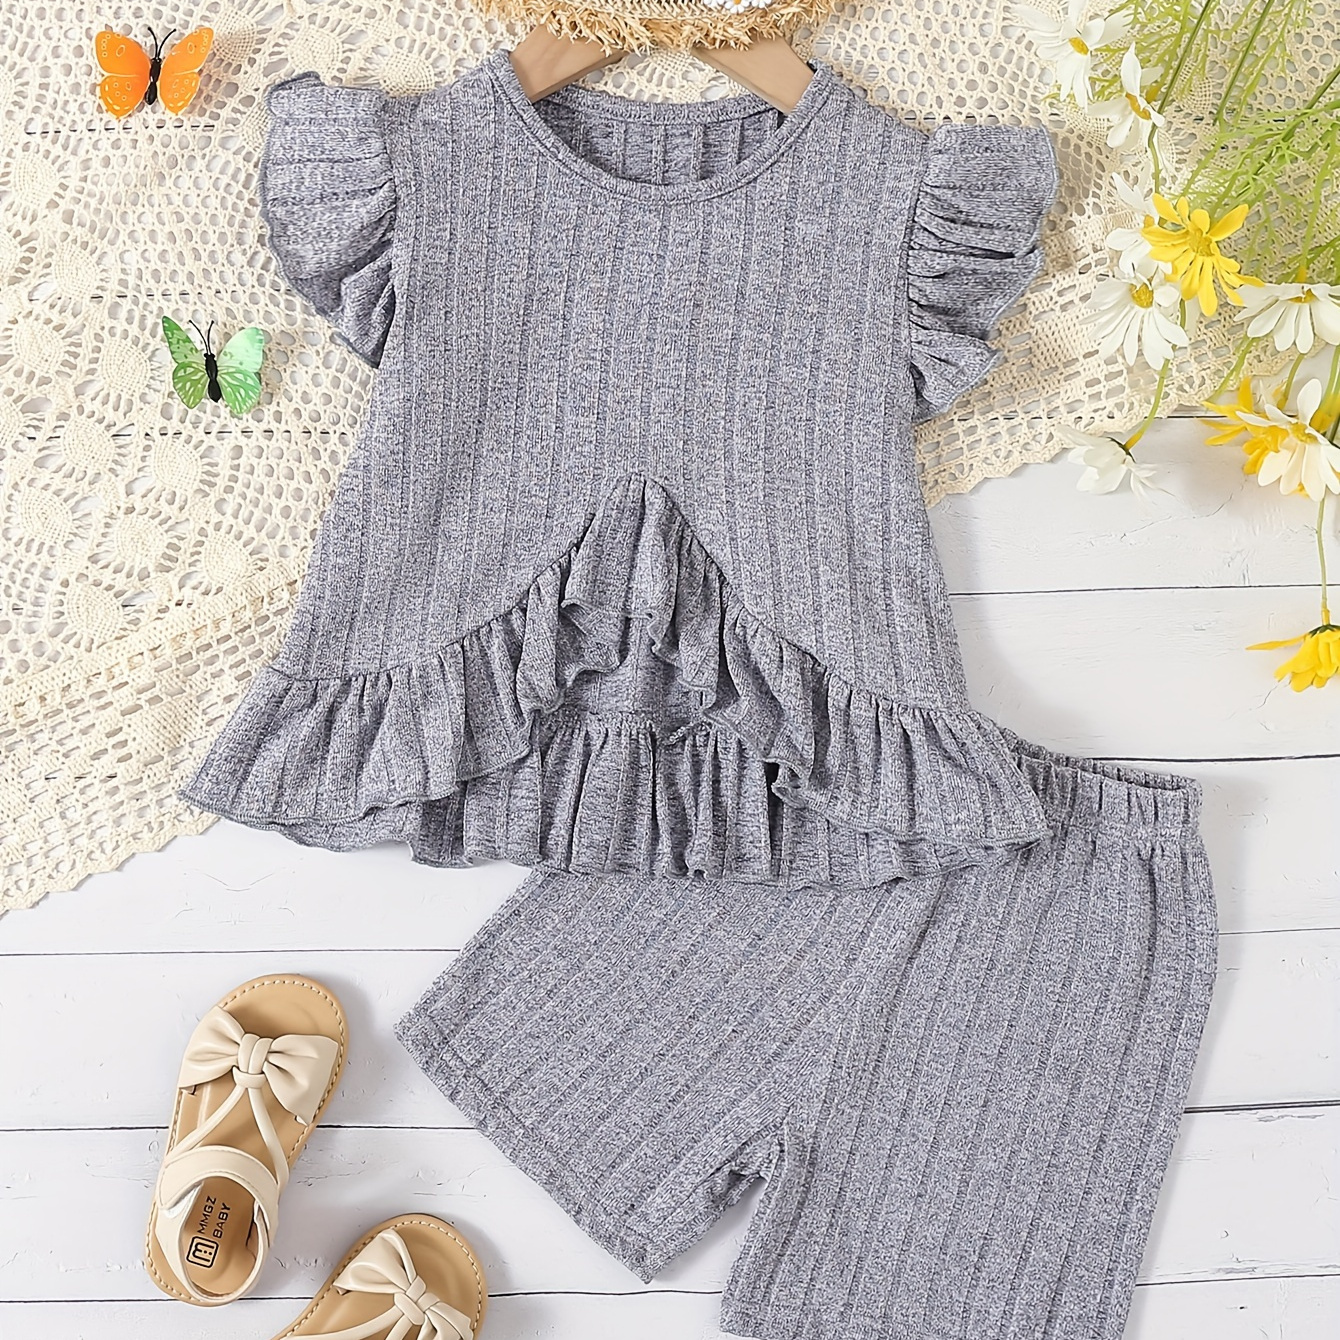 

Sweet Ruffle Girl's Outfit Asymmetric Ribbed Top & Shorts Set, Casual Cute Style 2pcs Summer Clothes